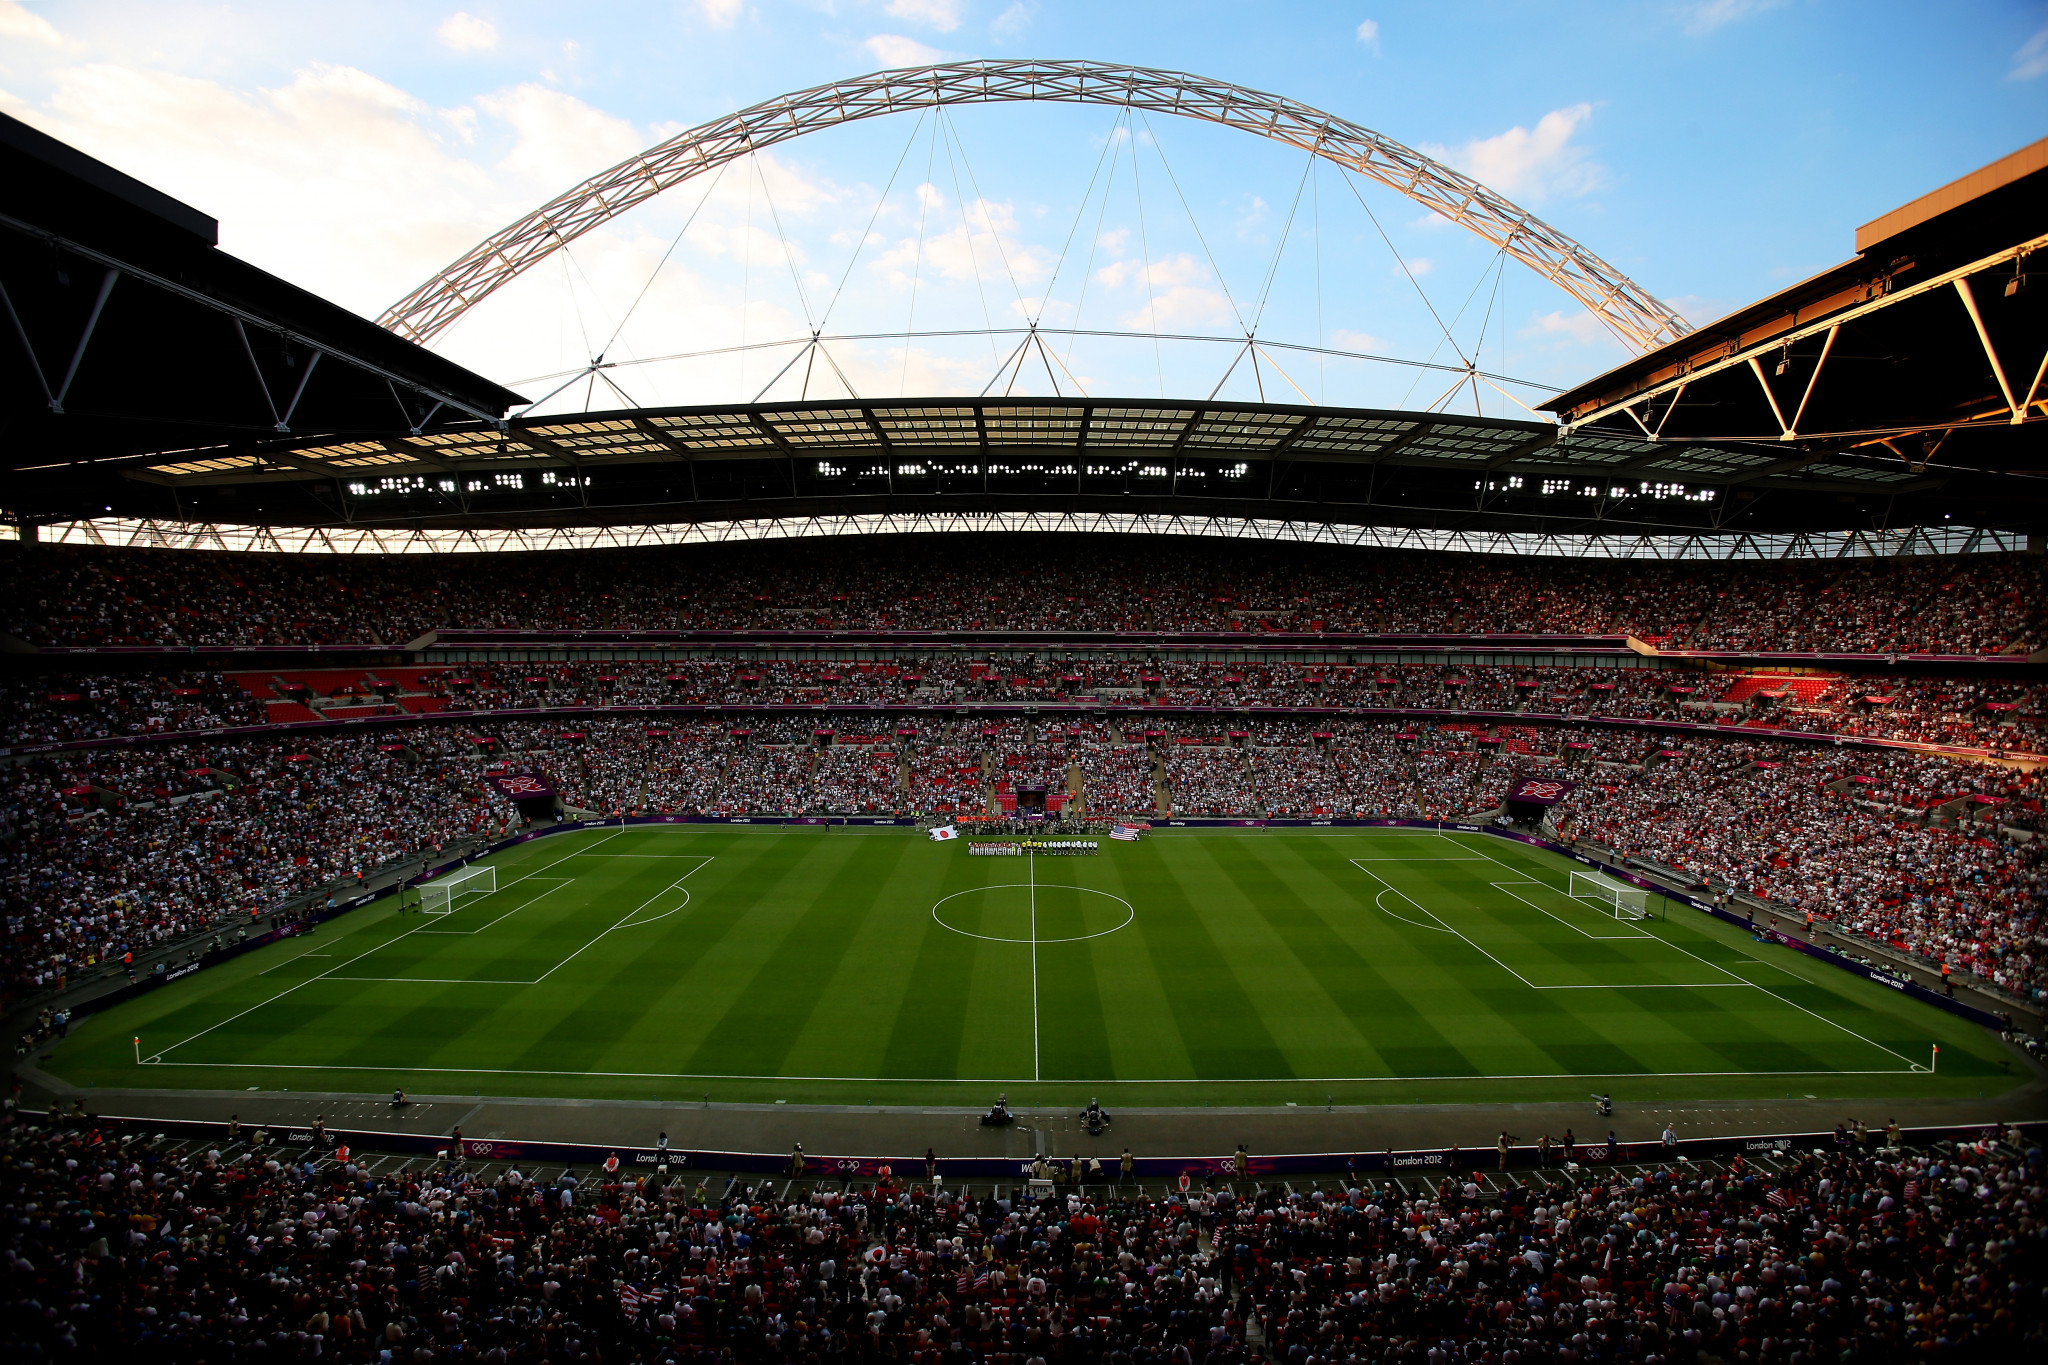 Fans at the Wembley Stadium will require a negative test or full vaccination to attend matches ©Getty Images